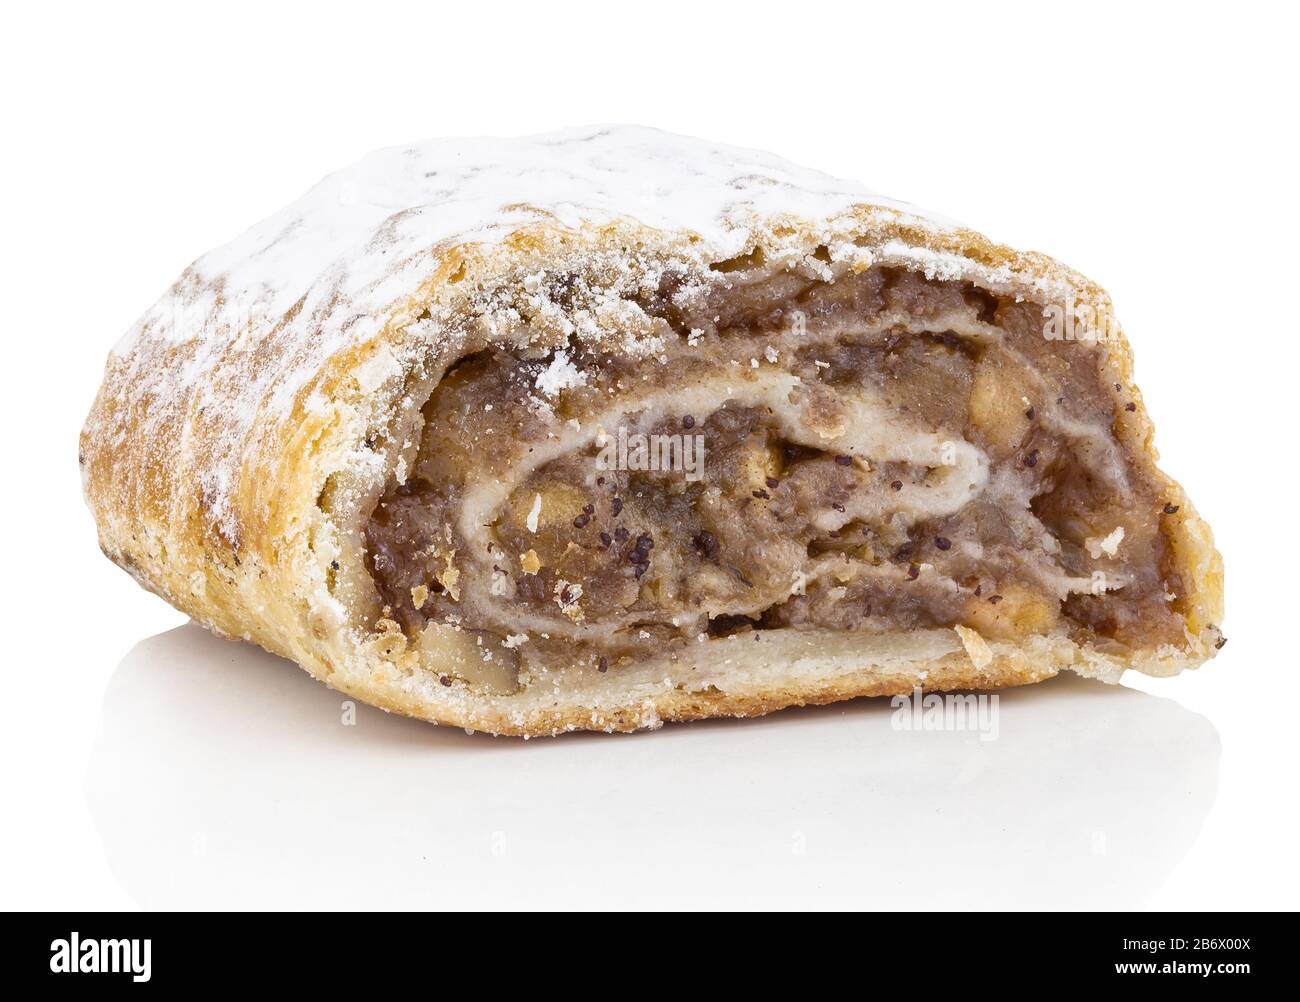 'Apfelstrudel' Apple Strudel, traditional Viennese strudel. Popular pastry in Austria, Northern Italy and other european countries. Isolated on white Stock Photo